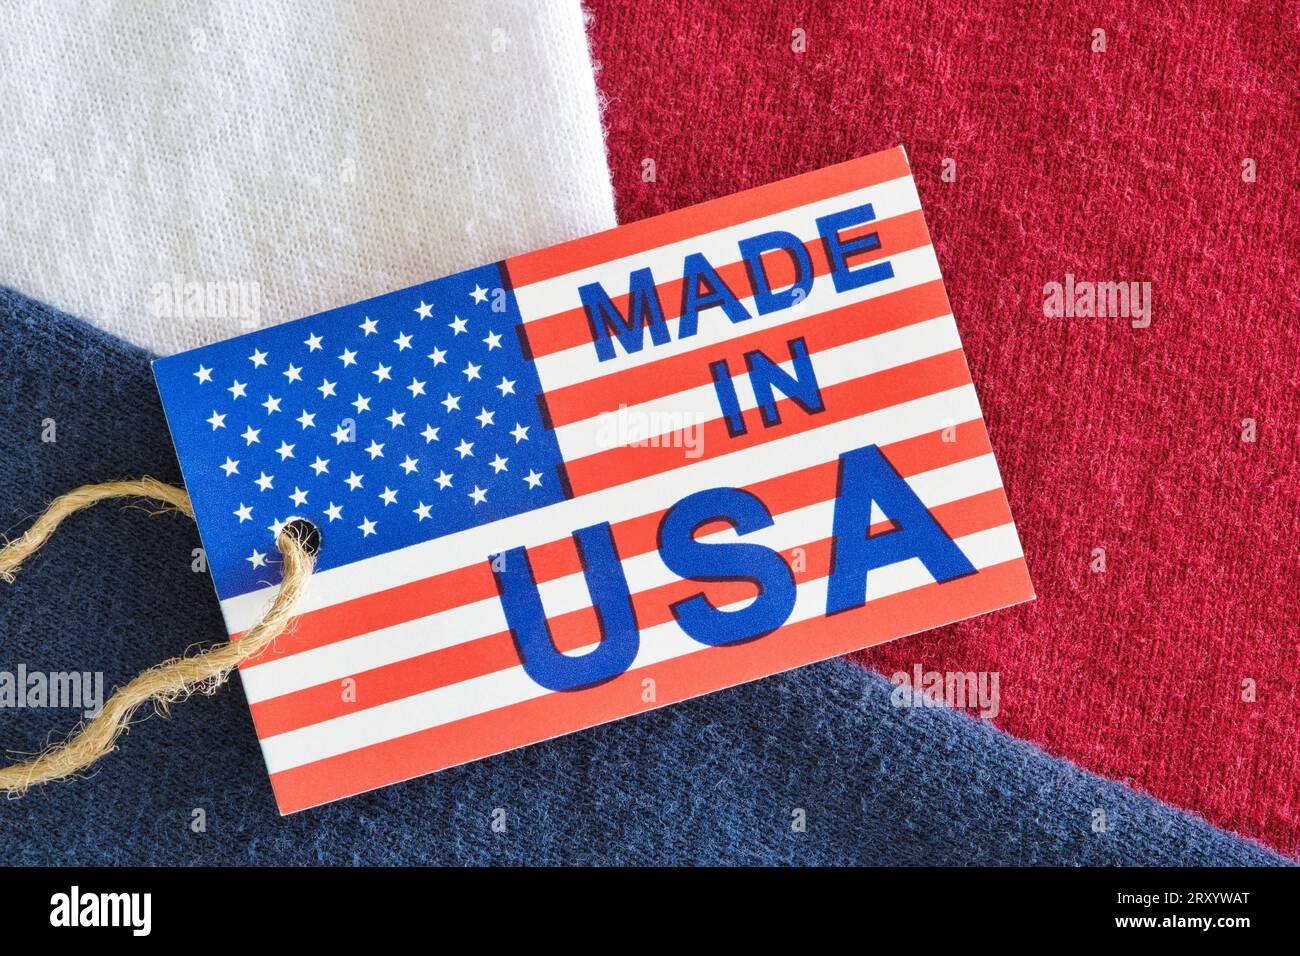 Made in USA label sitting on top of red, white and blue clothing shirts as an economy concept. Flat lay macro image with patriotic background details. Stock Photo